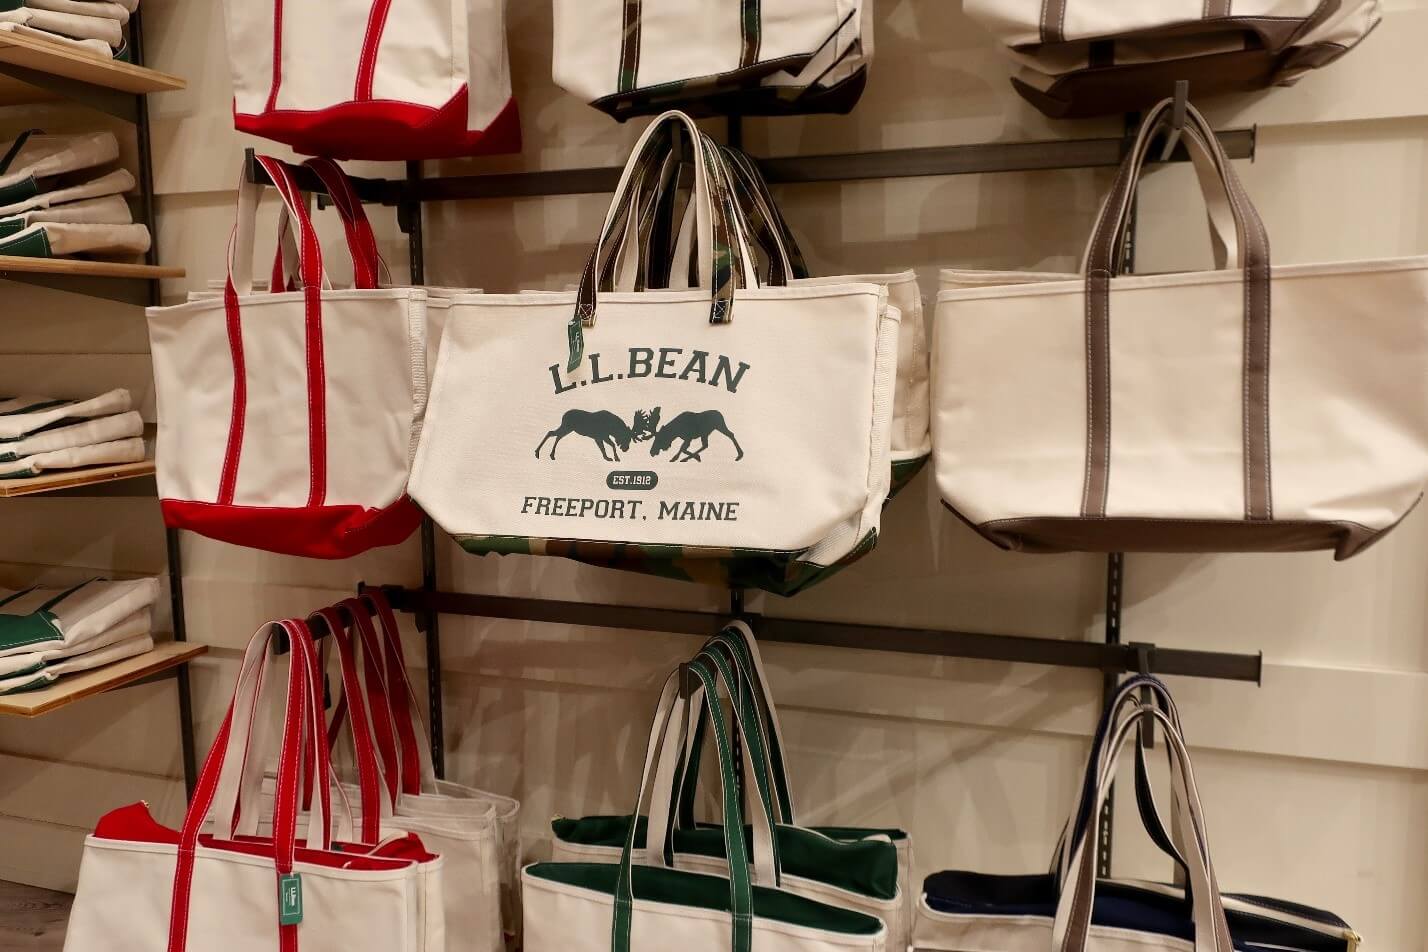 L L Bean tote bags being sold in a shop